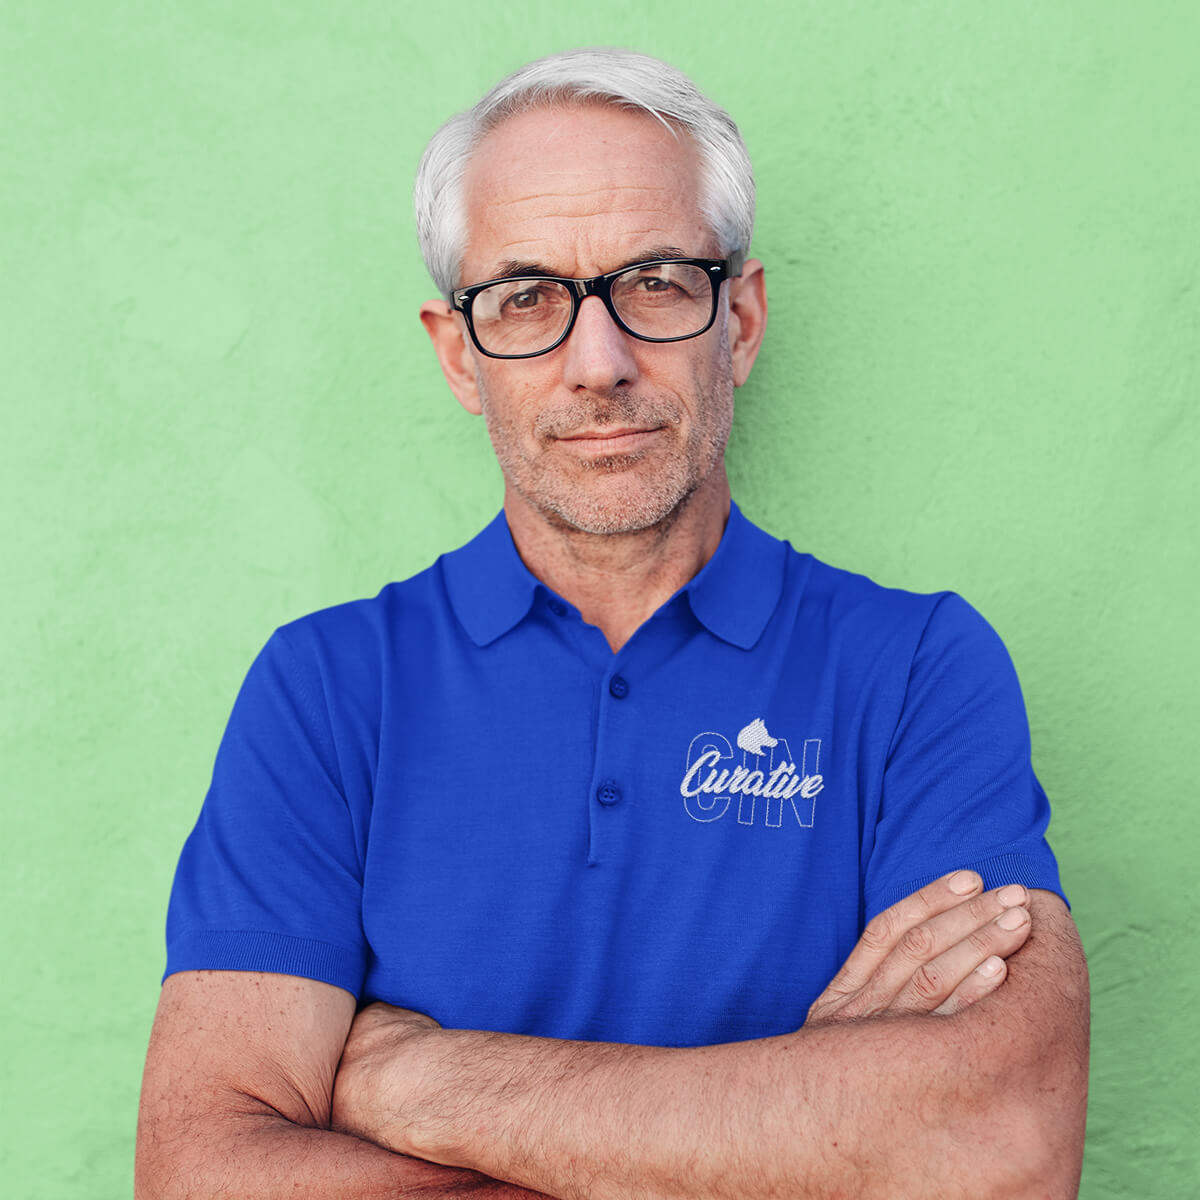 Man leans against textured wall wearing a blue polo collar shirt with white curative printing logo imprint